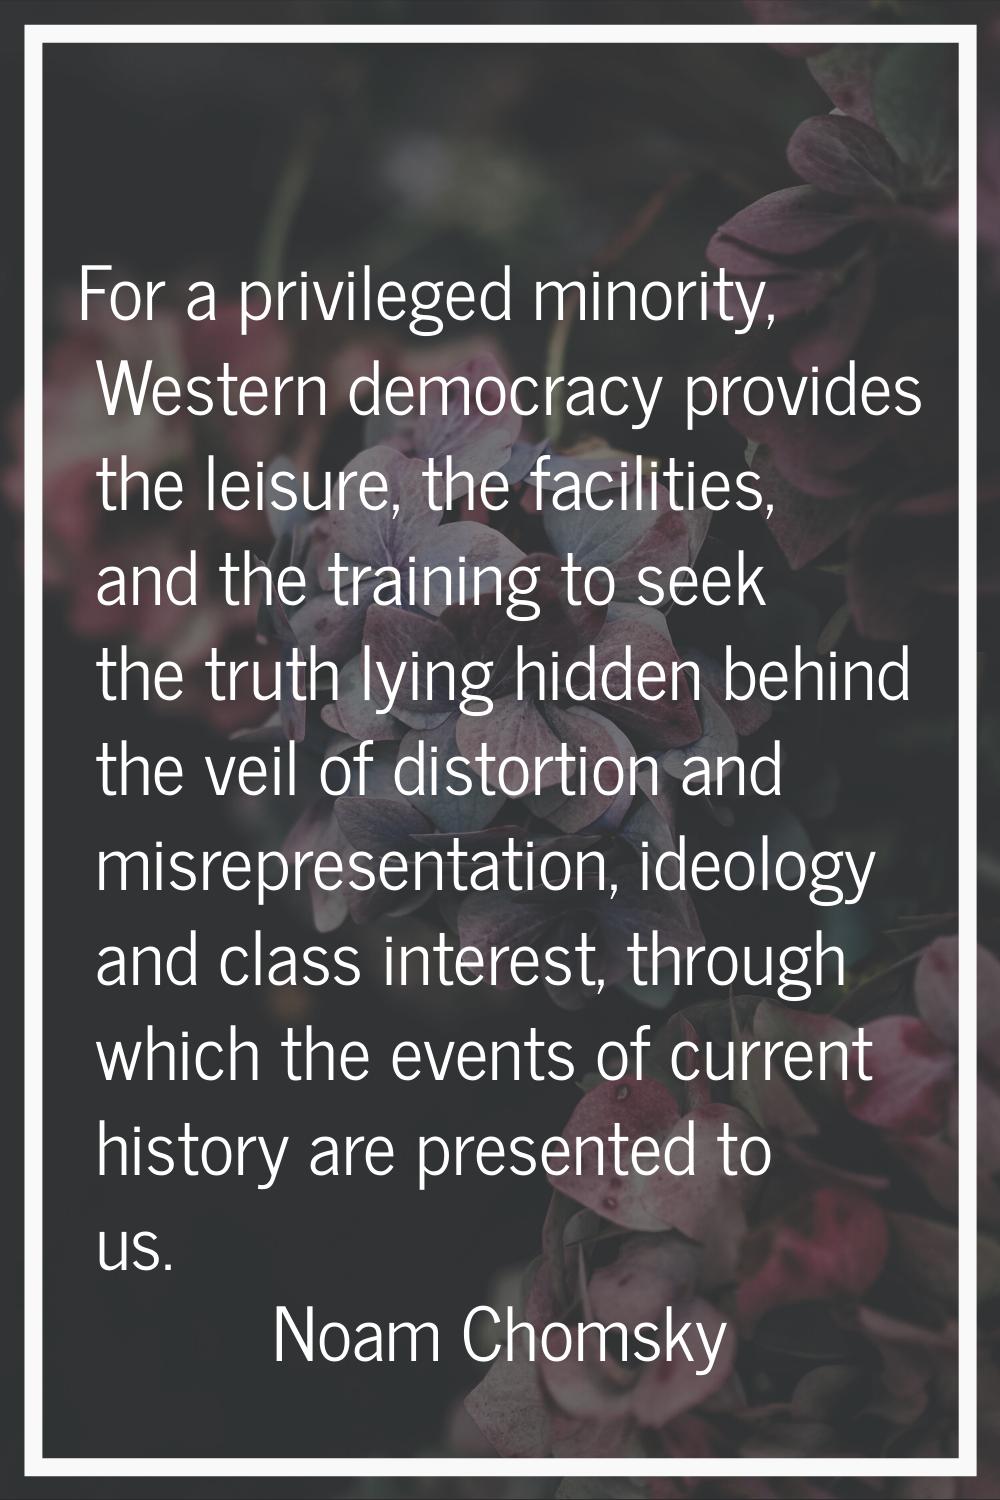 For a privileged minority, Western democracy provides the leisure, the facilities, and the training